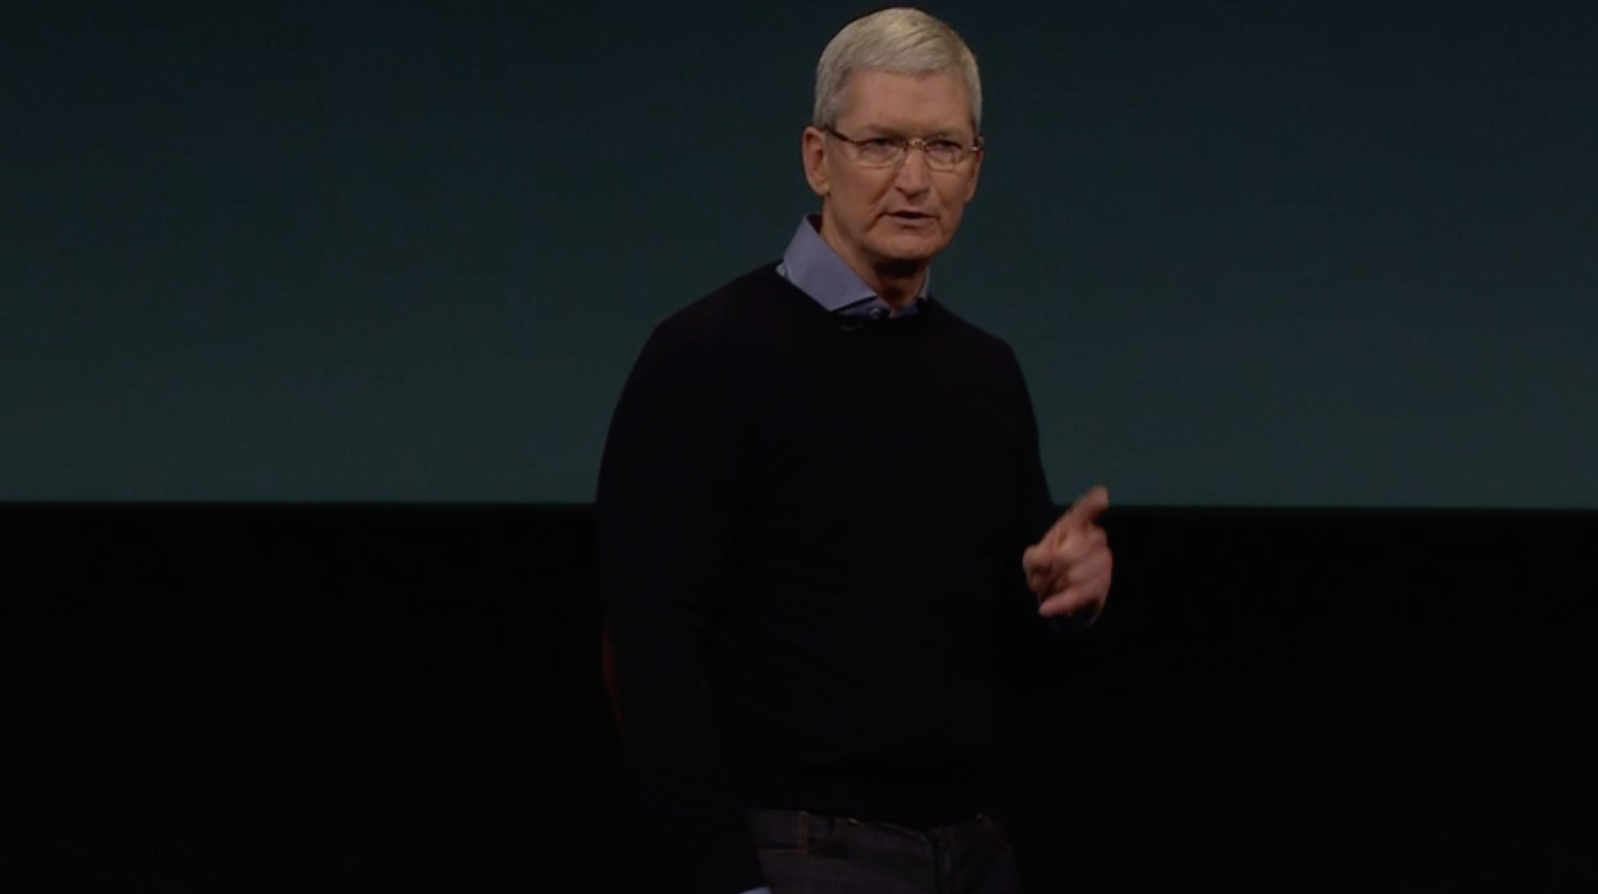 Apple CEO Tim Cook: Nation Needs To Decide How Much Power Government Has Over Data, Privacy